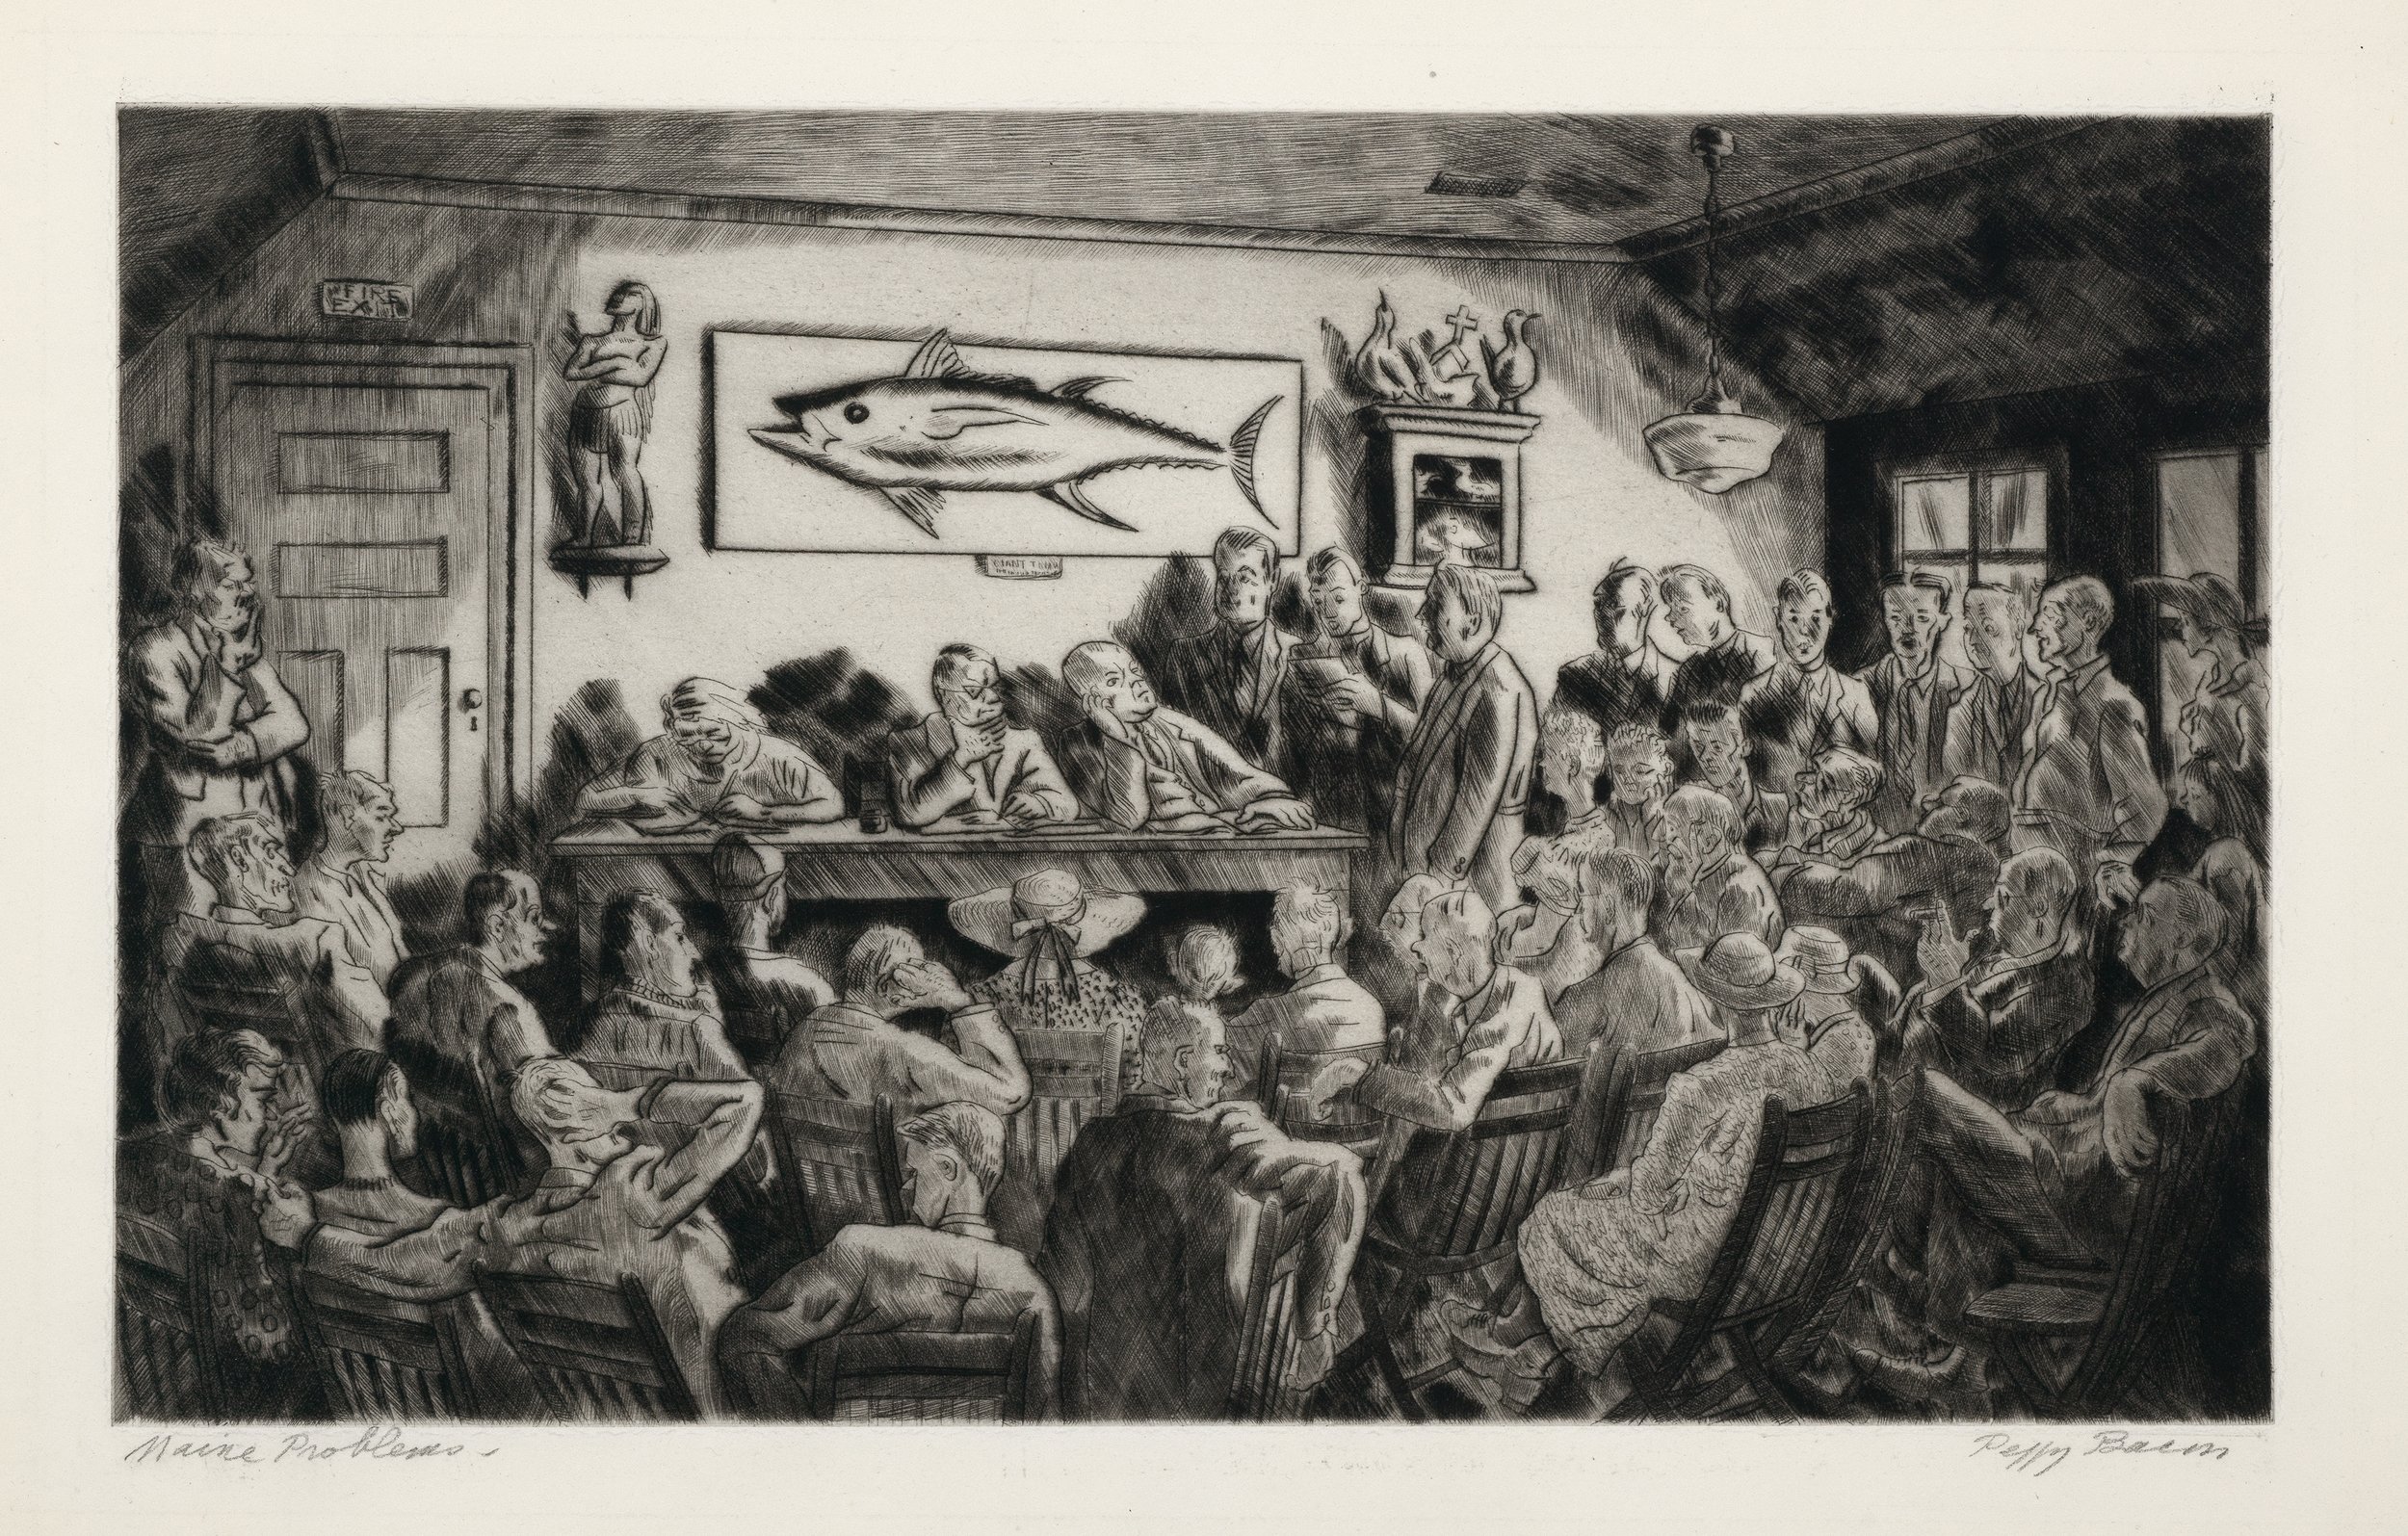  Peggy Bacon (United States, 1895–1987),  Maine Problems , 1941, drypoint on wove paper, 11 5/16 x 18 1/16 inches. Gift of Harold Shaw, 1984.370. Image courtesy Petegorsky/Gipe Photo 